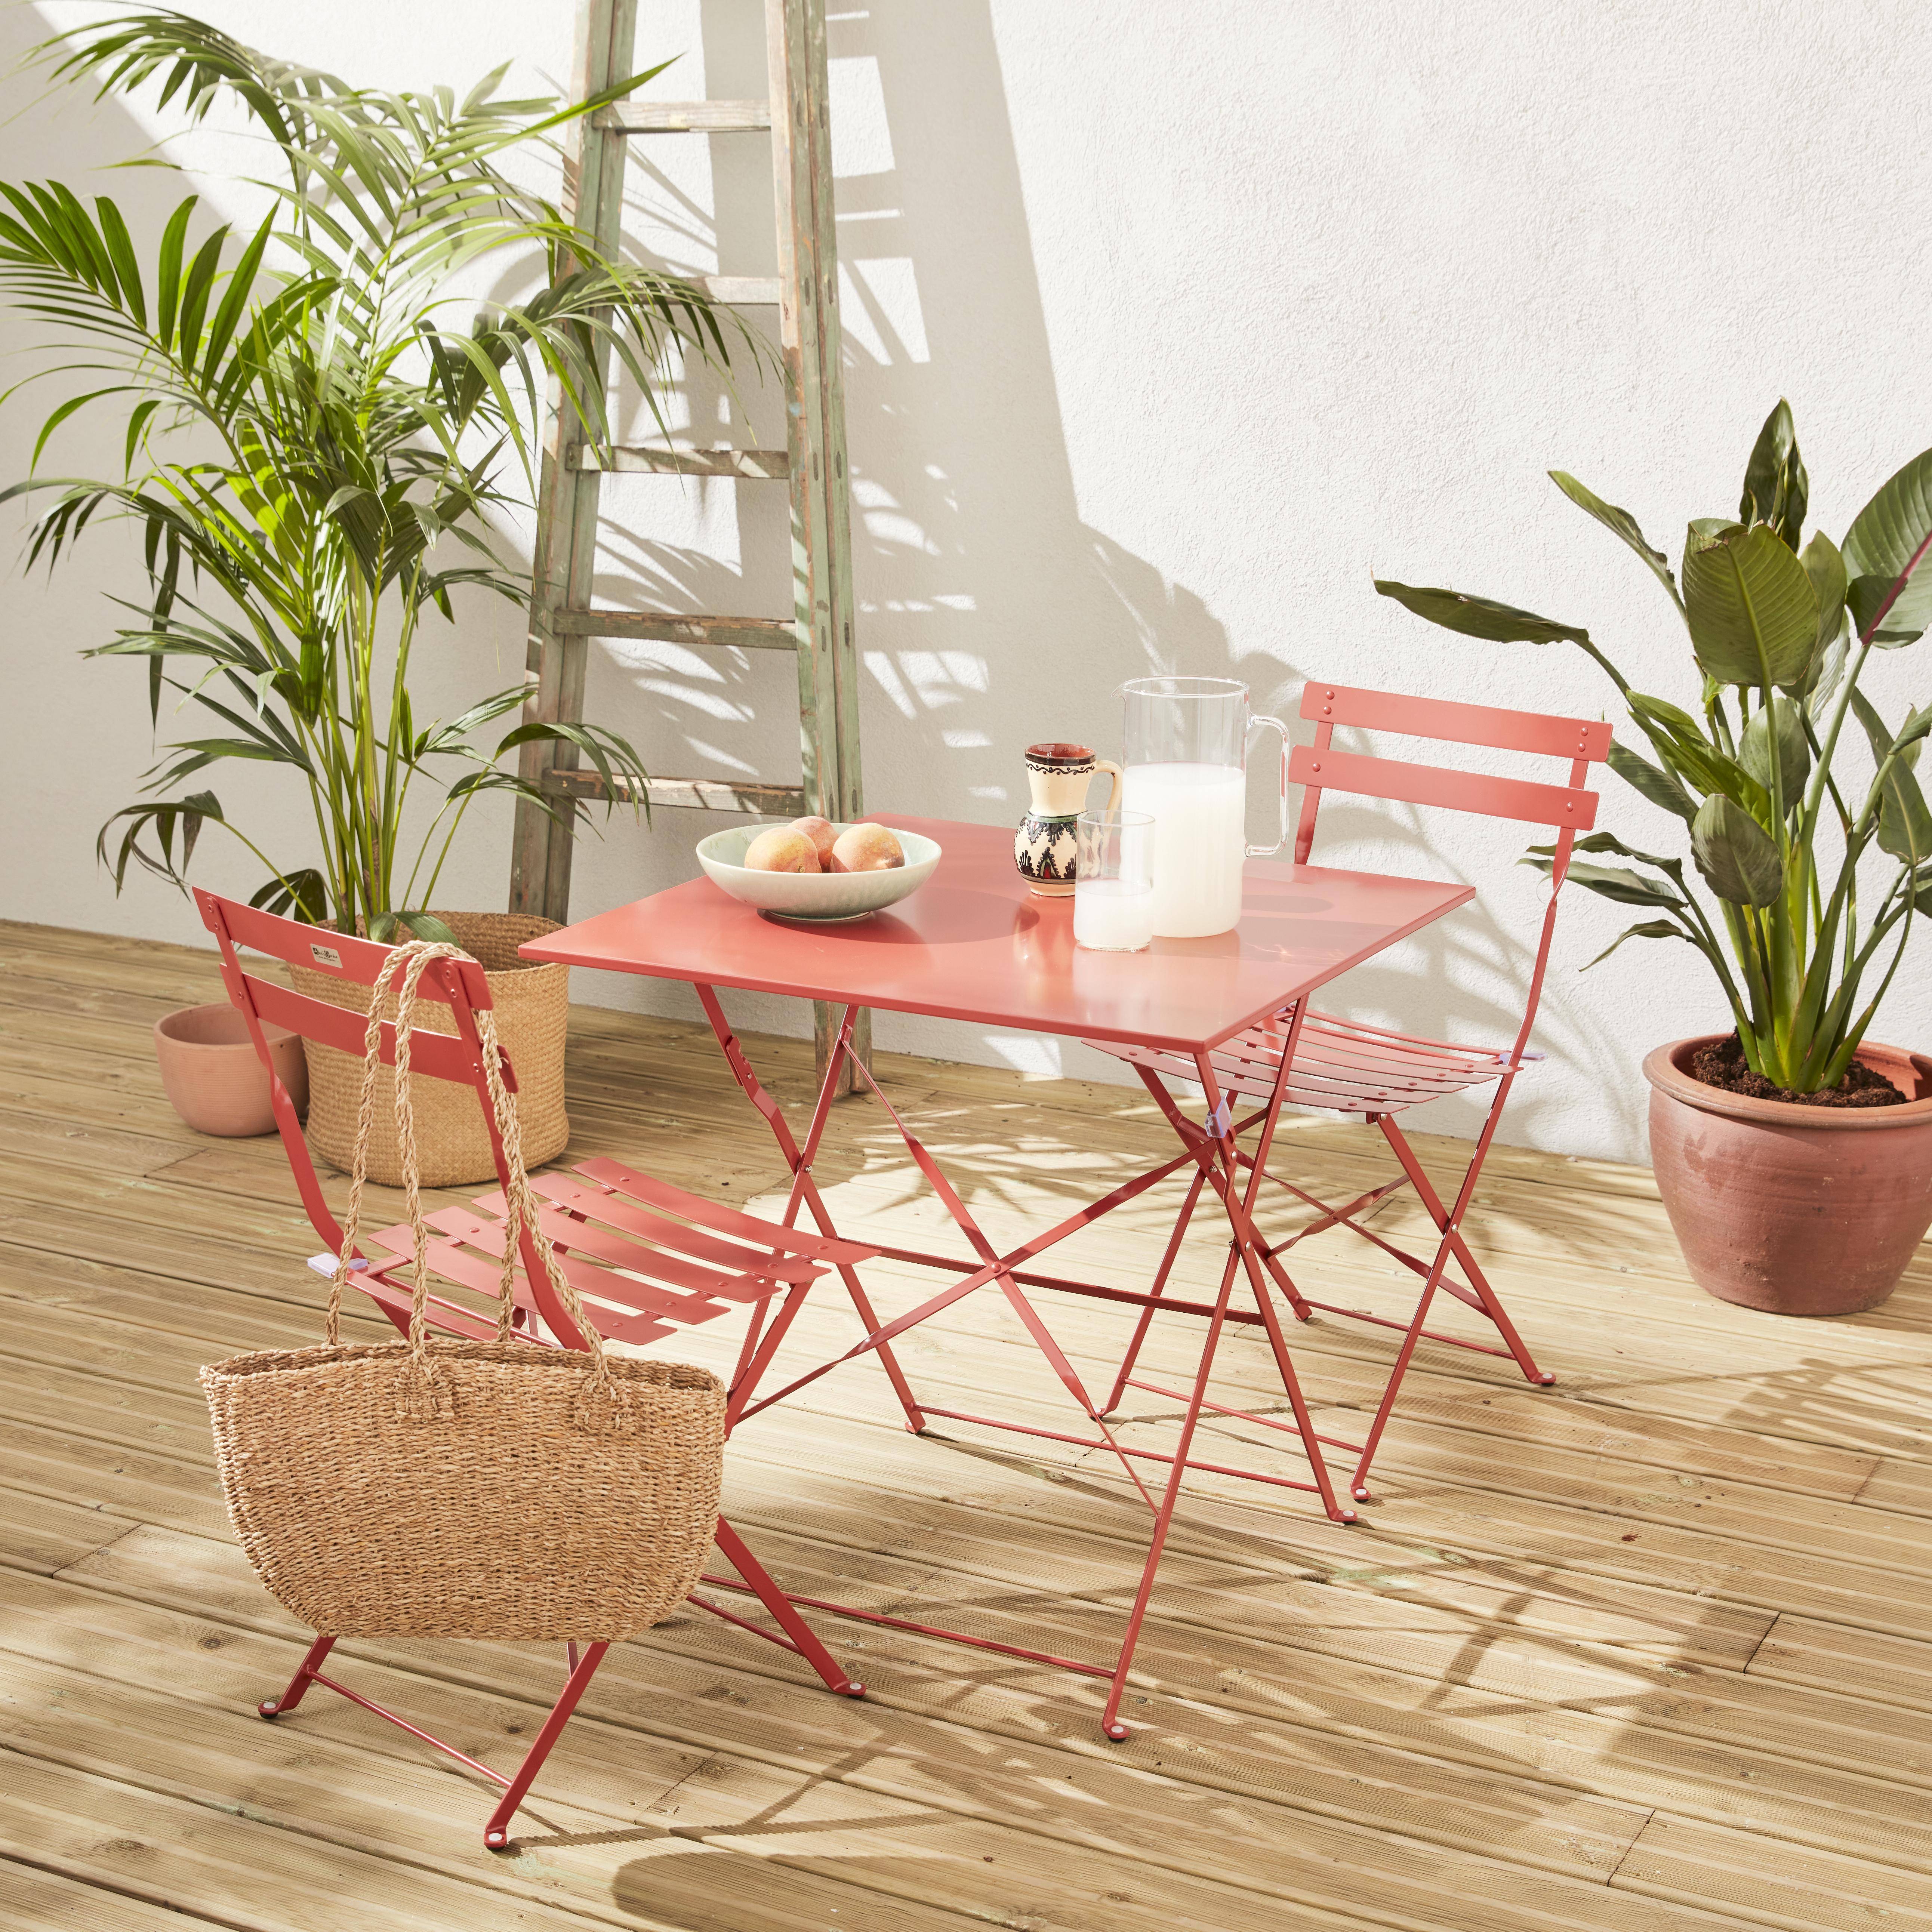 2-seater foldable thermo-lacquered steel bistro garden table with chairs, 70x70cm - Emilia - Terracotta,sweeek,Photo1